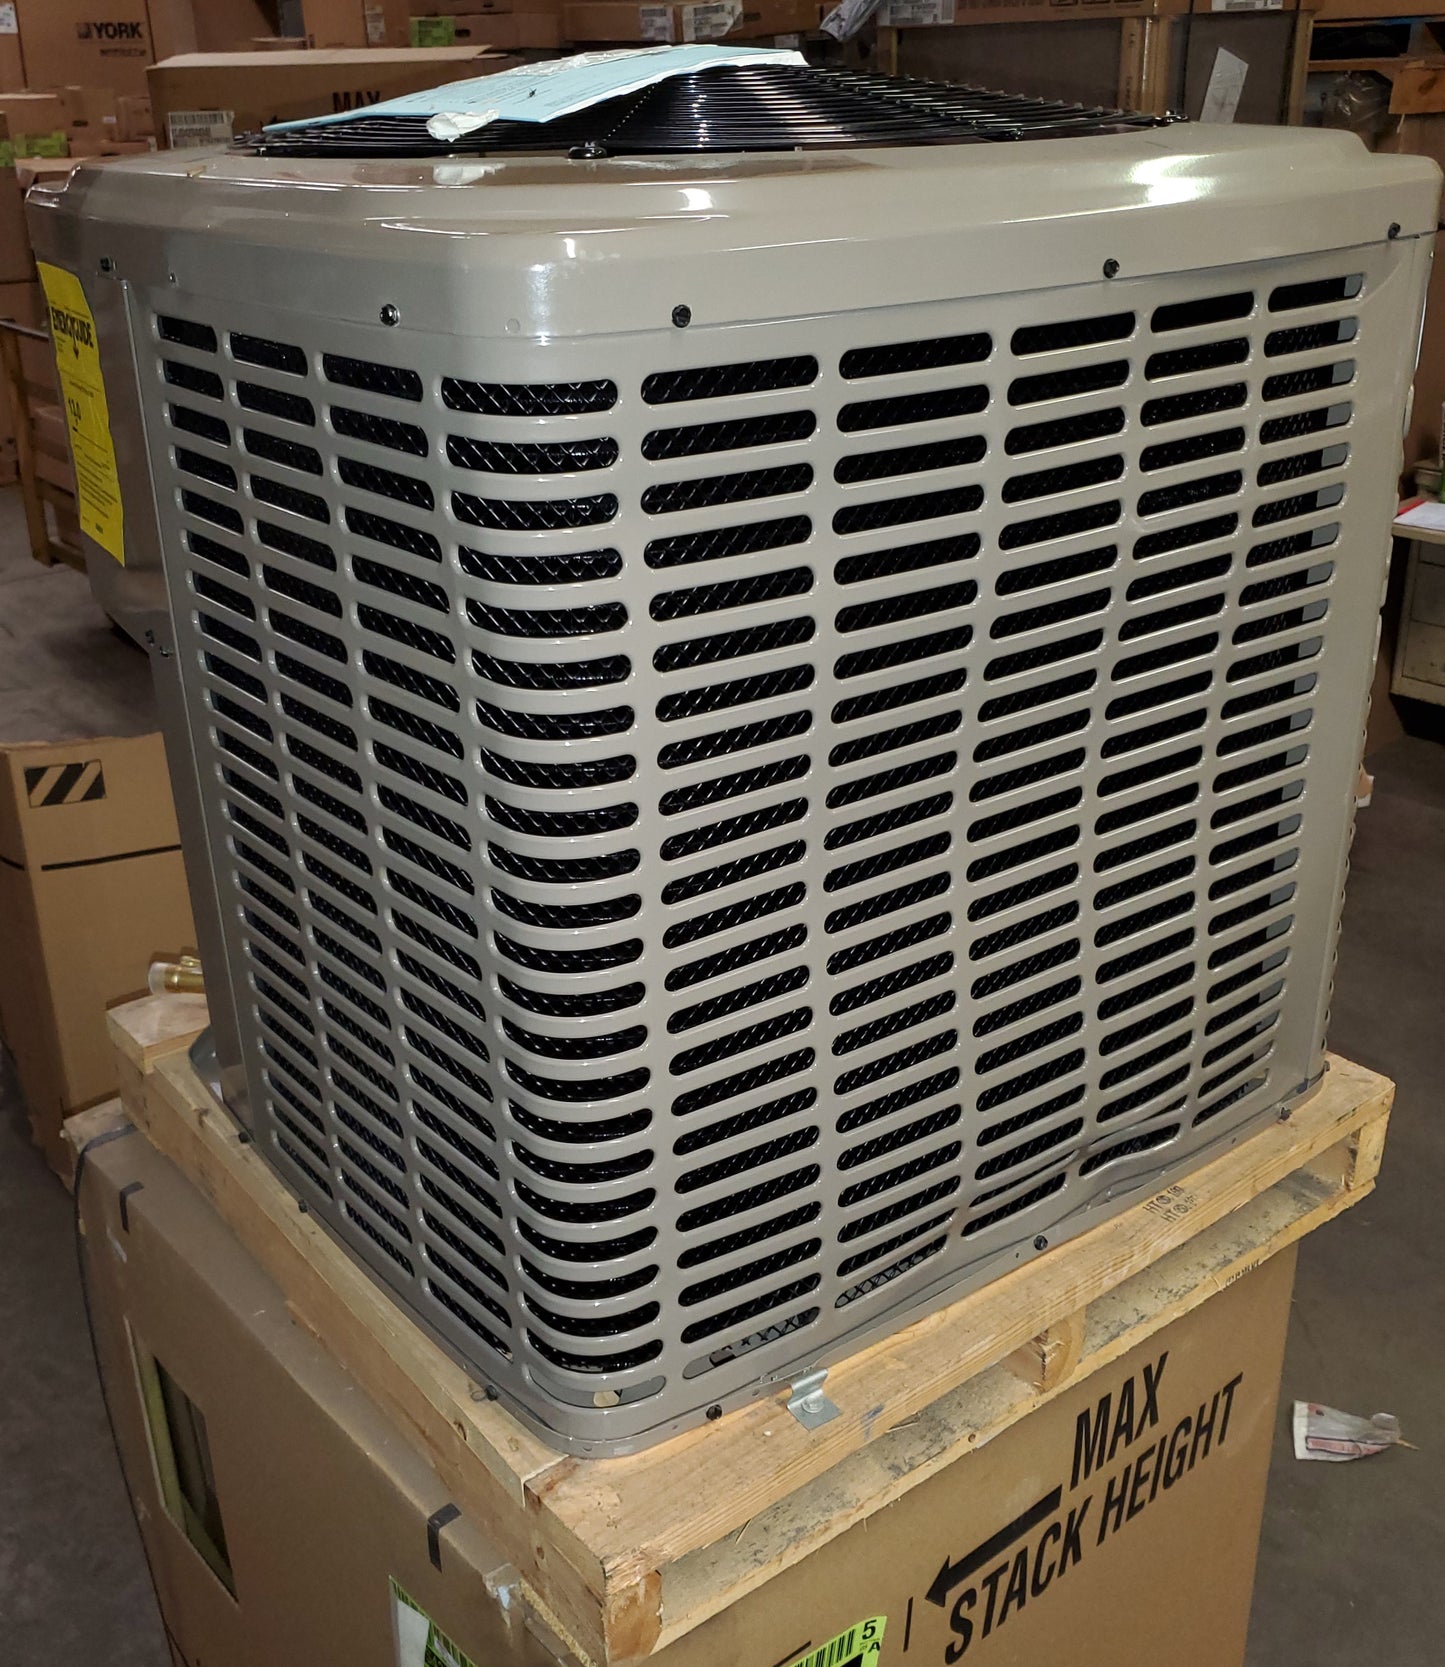 4 TON "LX" SERIES SPLIT-SYSTEM AIR CONDITIONER, 13 SEER 208-230/60/1 R-410A